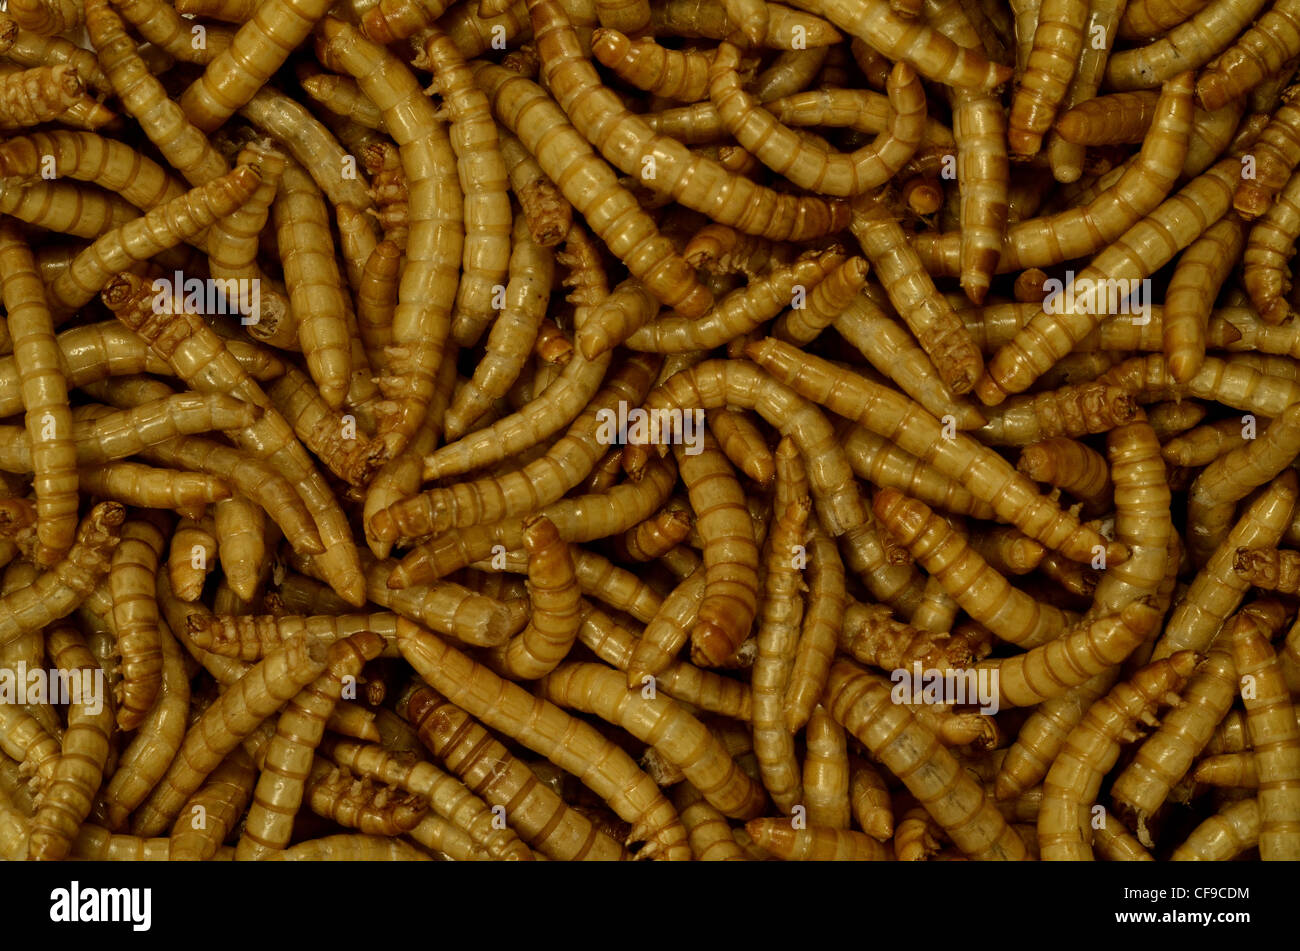 A mass of freeze-dried meal-worms / Tenebrio molitor for human consumption. Open a can of worms metaphor. Also for bird feed. Stock Photo